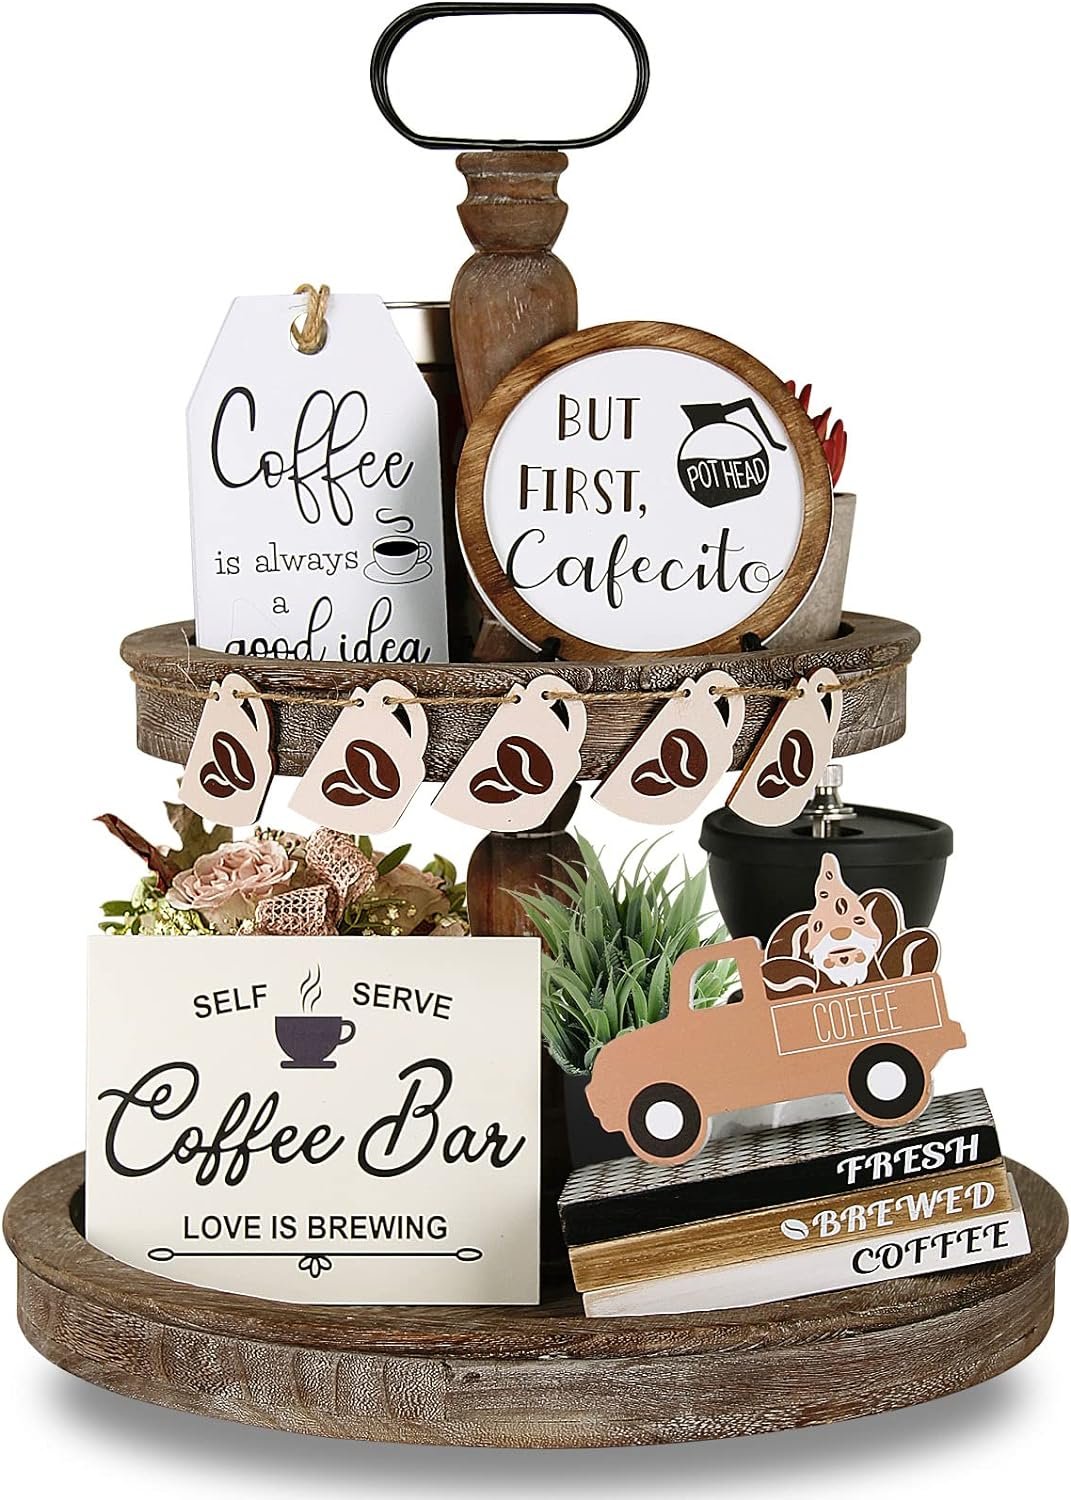 coffee bar decor for coffee tiered tray decor 12 pieces coffee mini wooden book stacks accessories truck decor wood coff